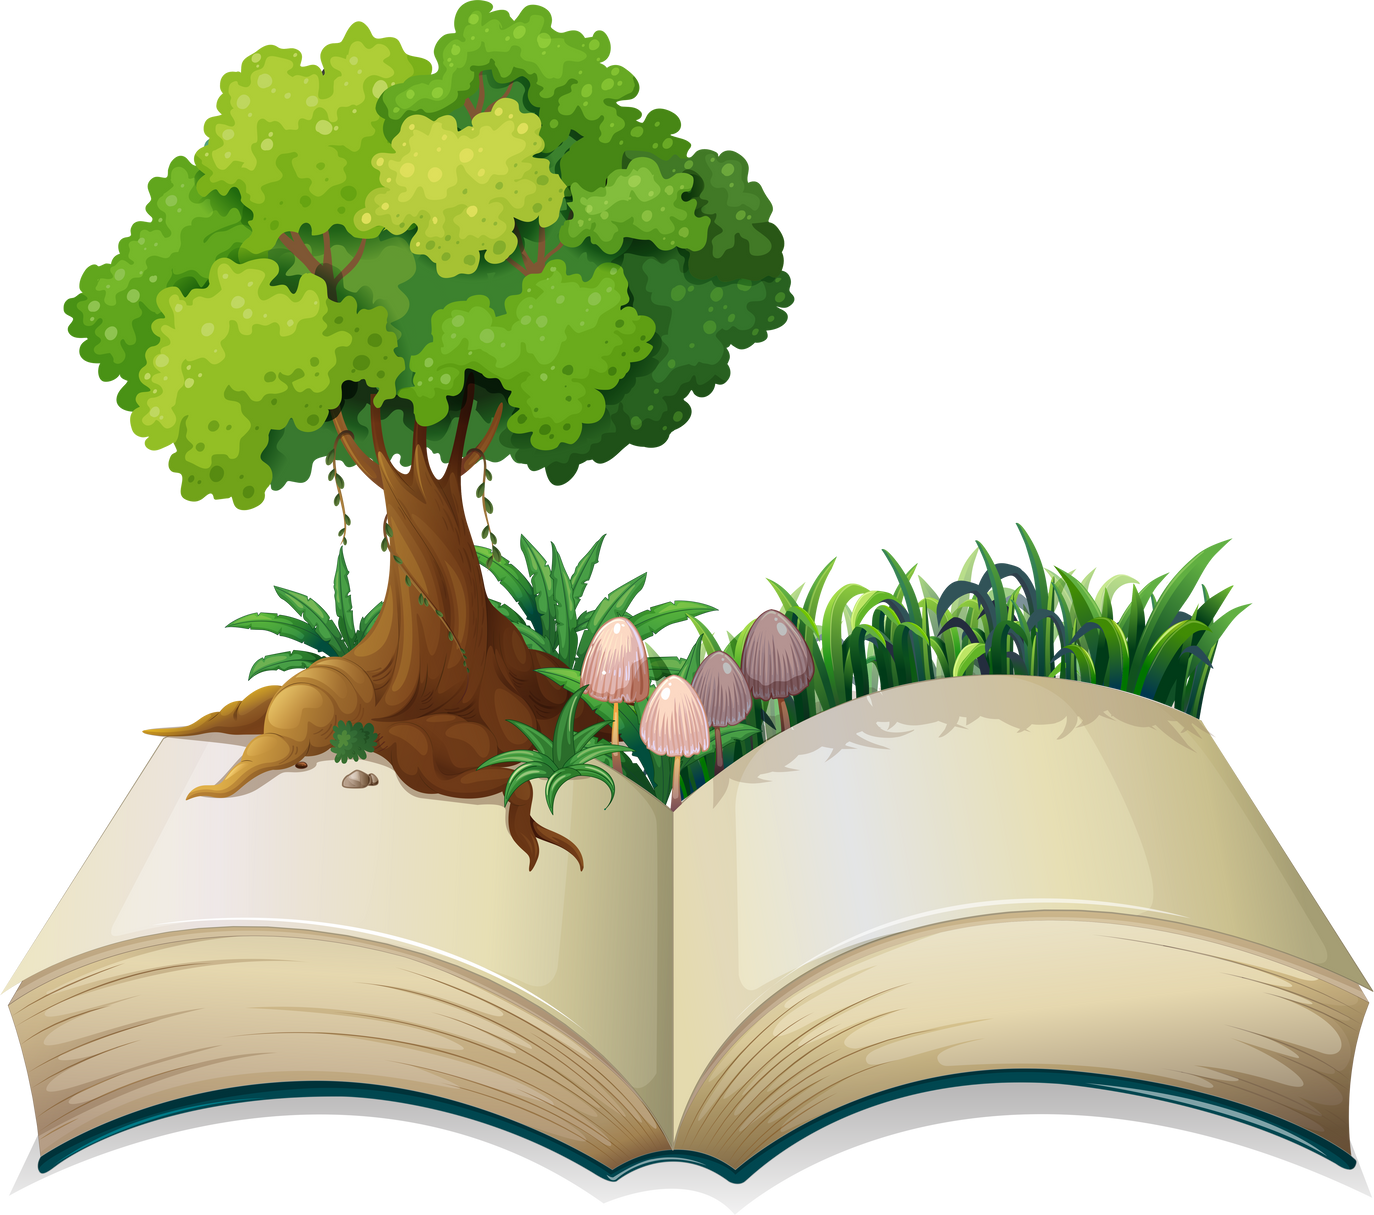 Open Book with Tree Illustration